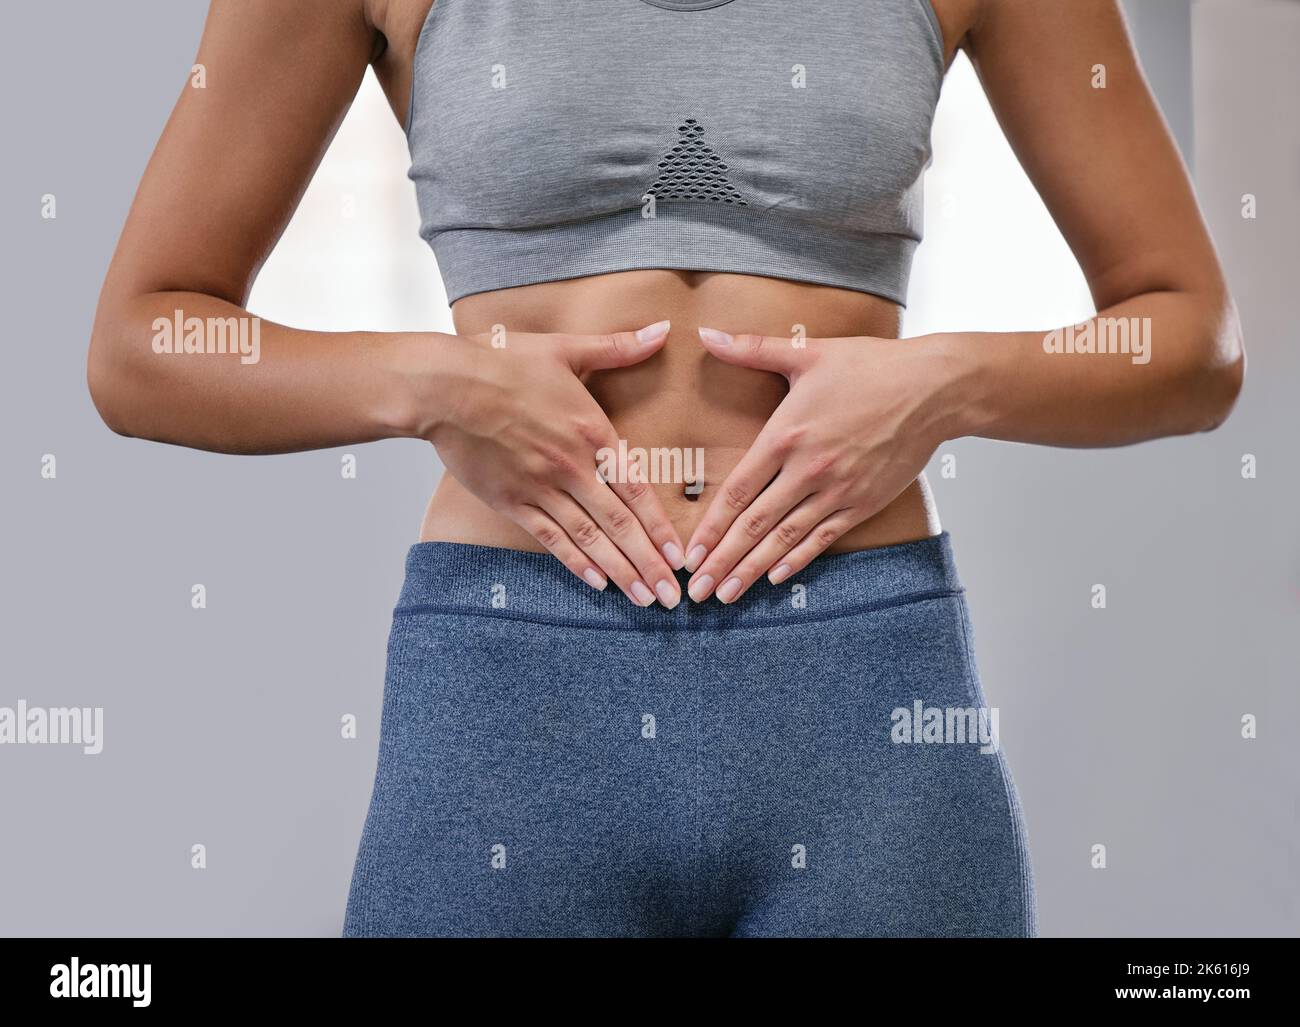 Closeup of one fit caucasian woman framing hands around her slim belly to show weight loss while exercising against a grey background. Female athlete Stock Photo